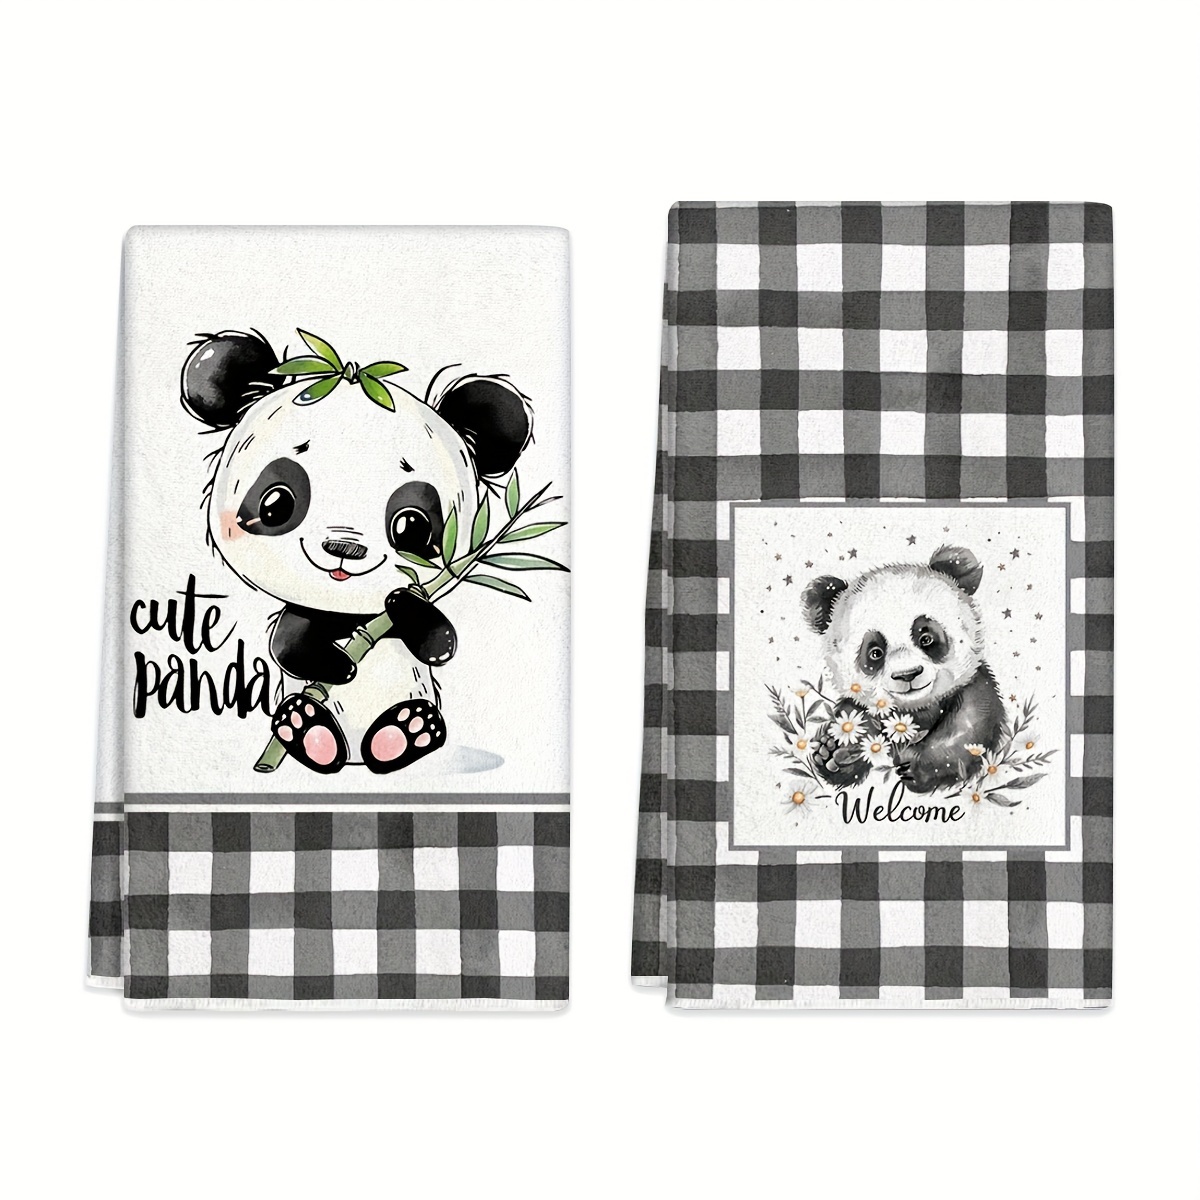 

2pcs, Hand Towel, Black And White Panda Kitchen Decorative Dish Towels, Absorbent Cloth Tea Towels For Cooking, Baking And Cleaning, Housewarming Gifts, Cleaning Supplies, Bathroom Supplies